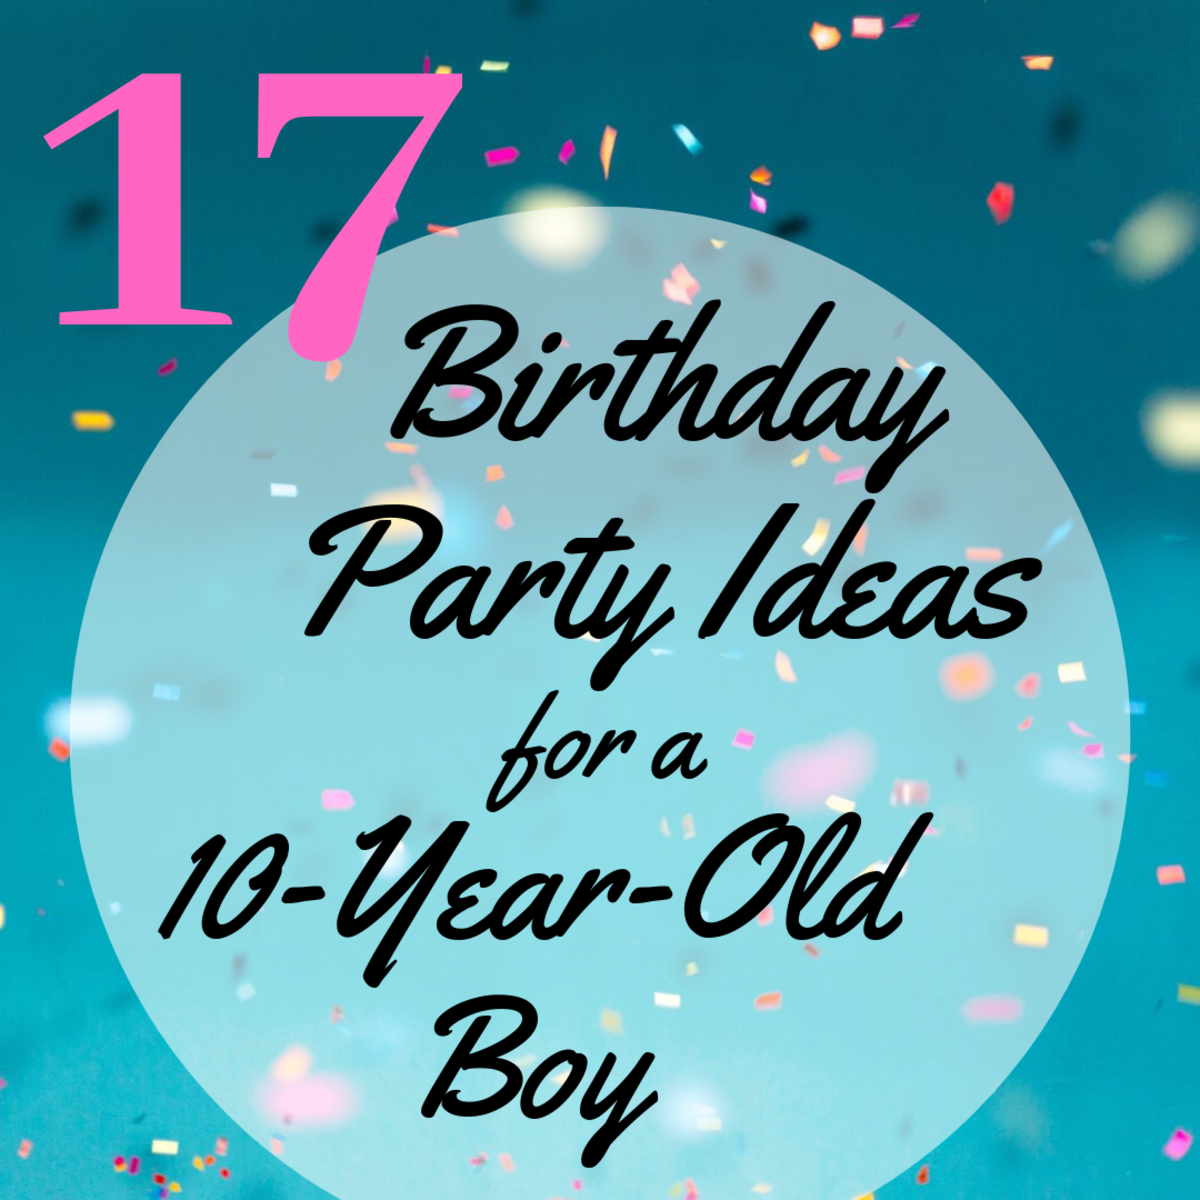 17 Birthday Party Ideas for a 10